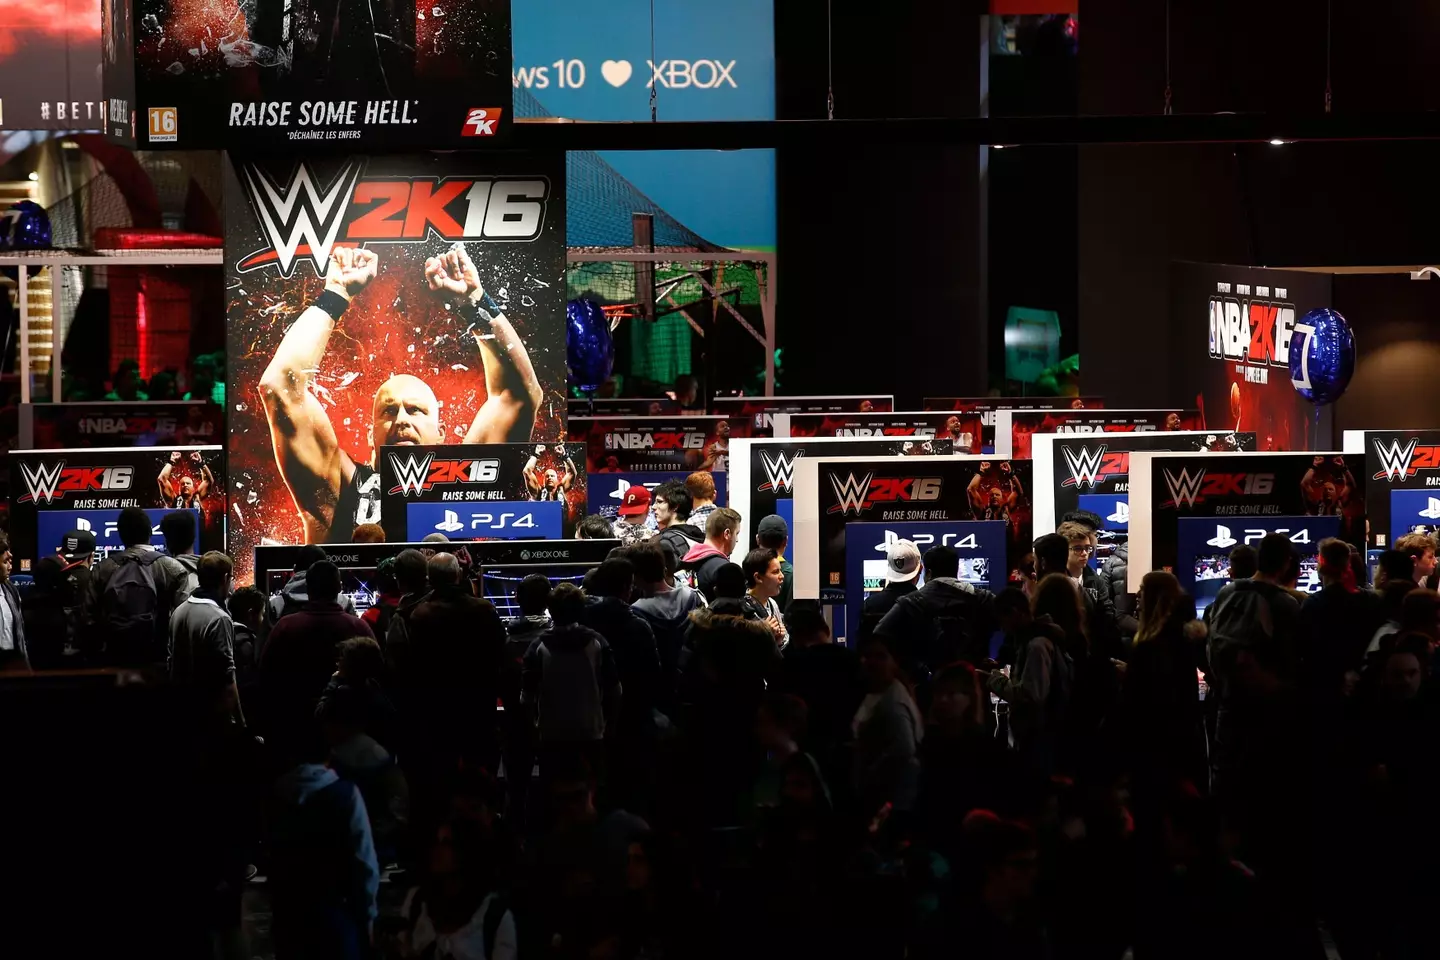 The tattoos featured in three games including WWE 2K16.